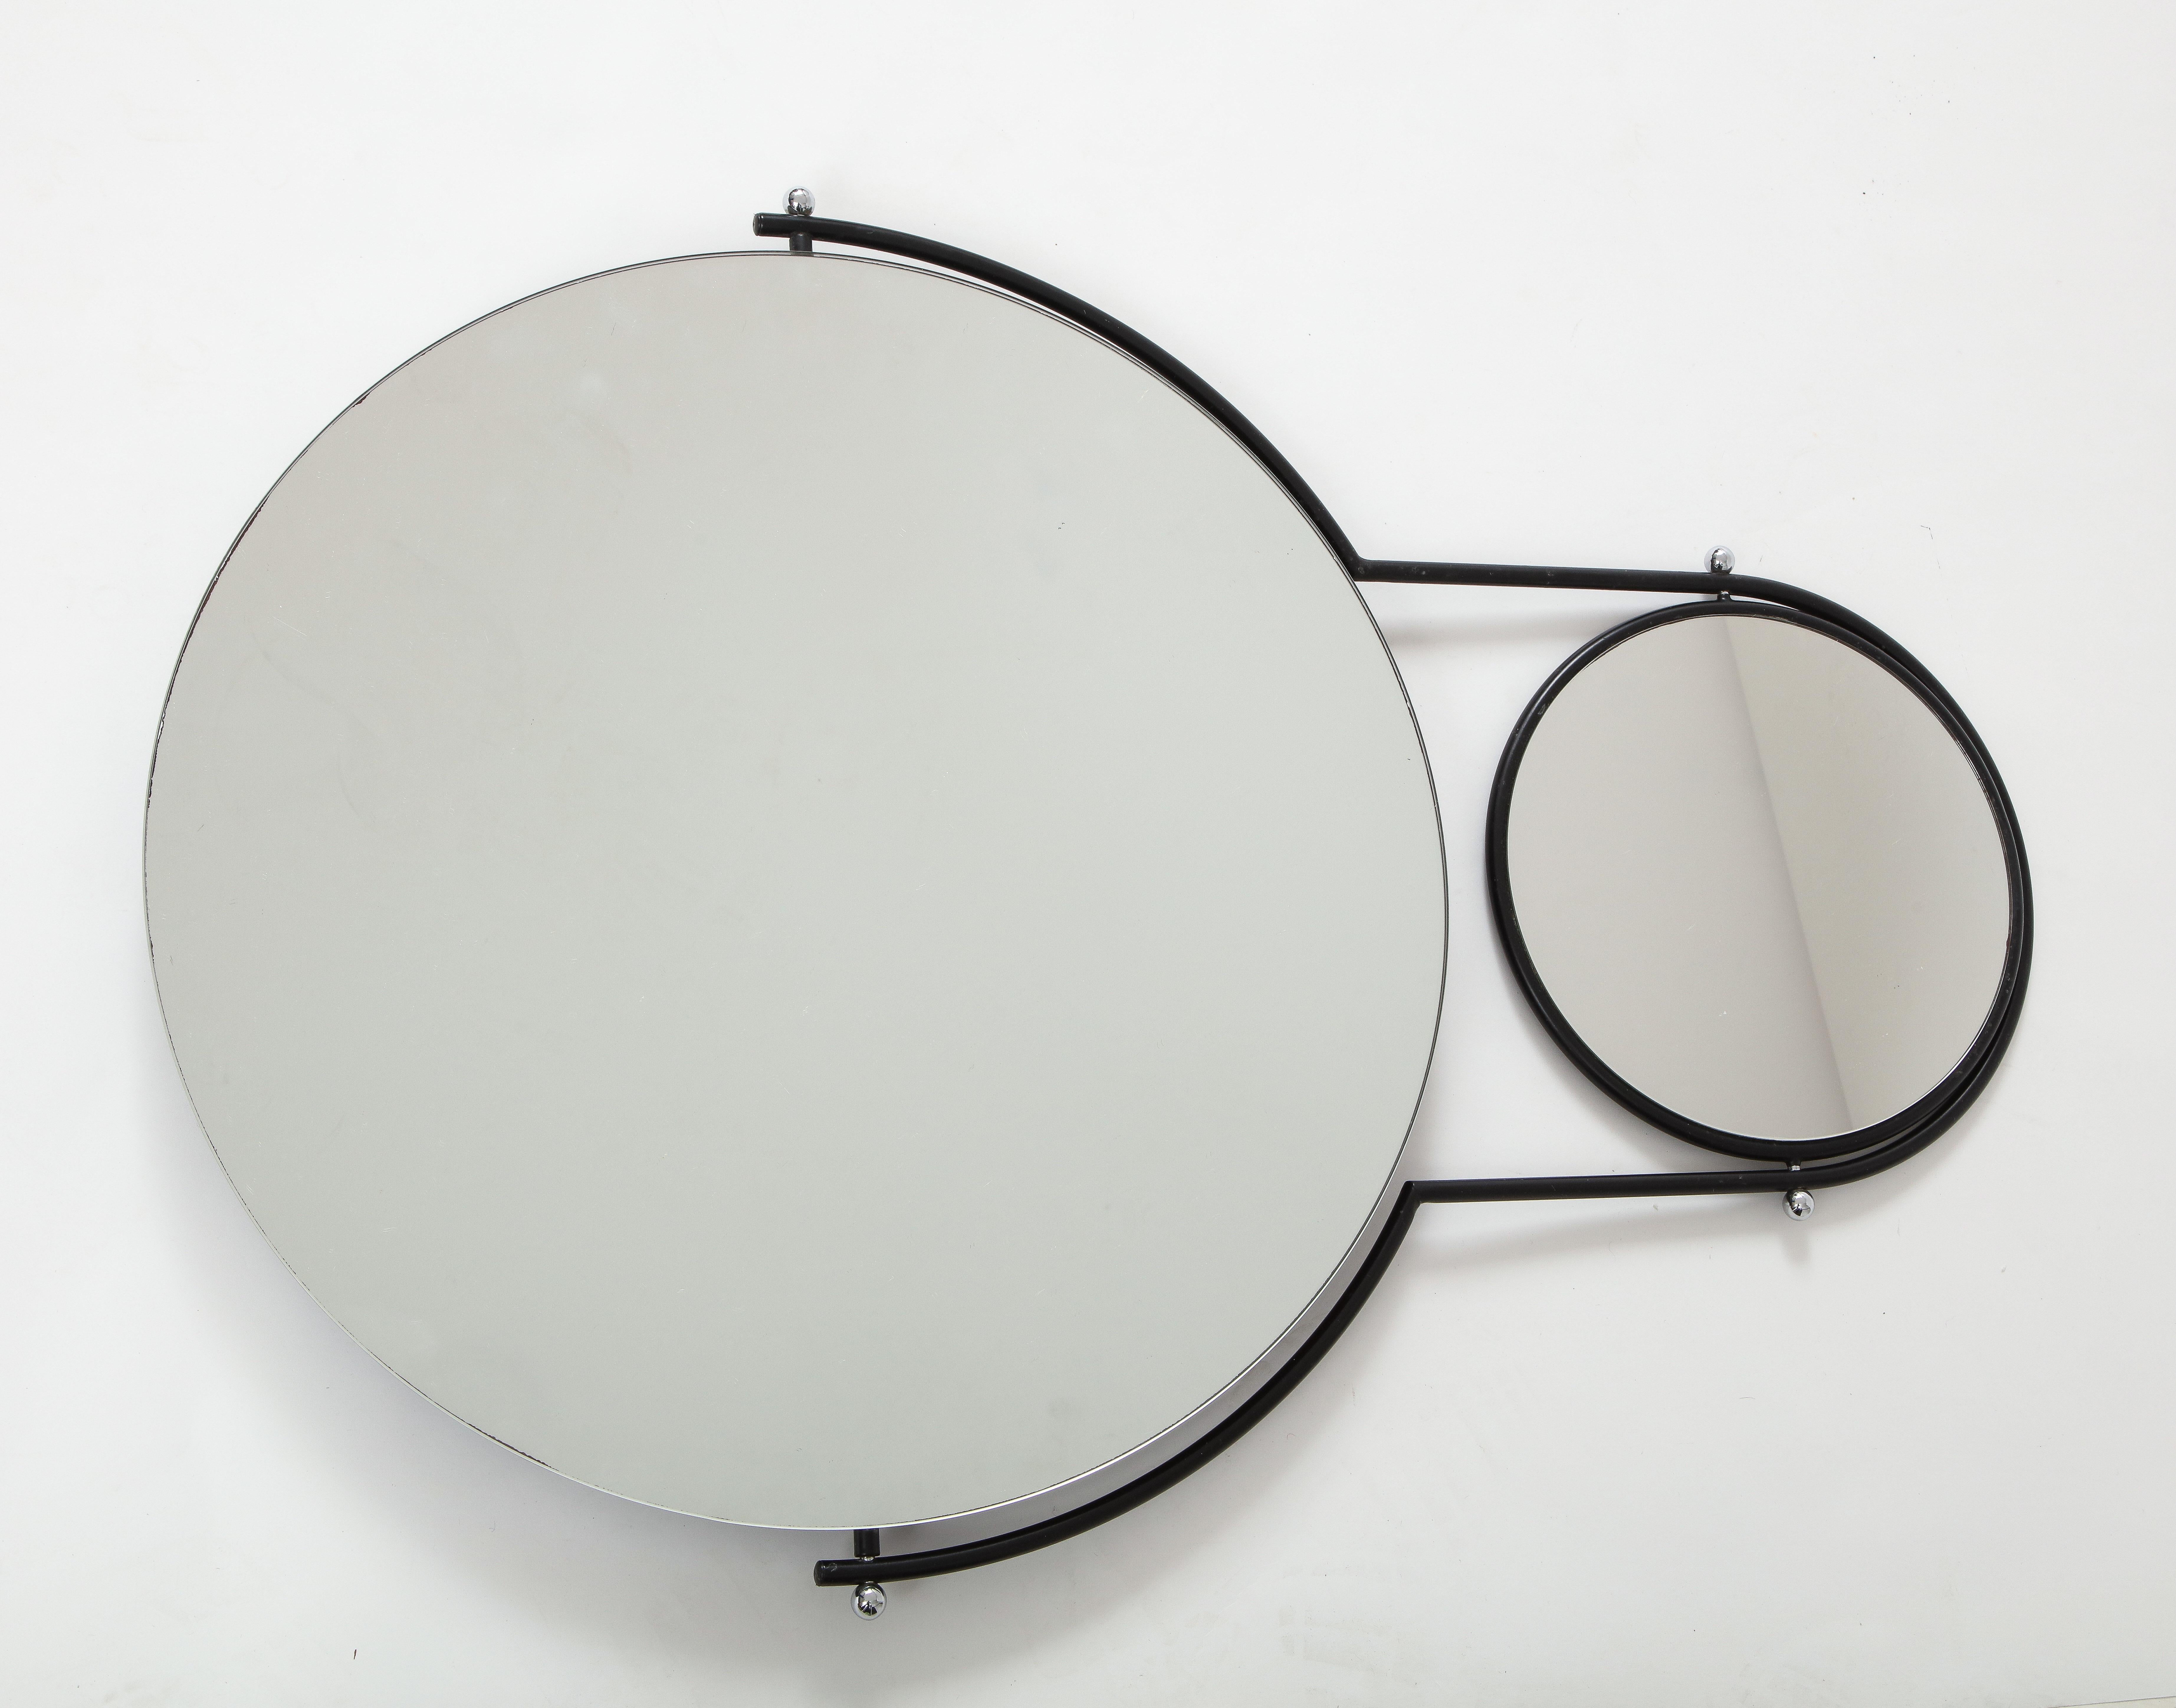 An ingenious designed modernist 'Orbit' wall mirror by Rodney Kinsman for Bieffeplast. This mirror allows for an angled view through the accompanying two sided mirror that is attached on a swiveling black metal bracket. The work symbolizes the moons